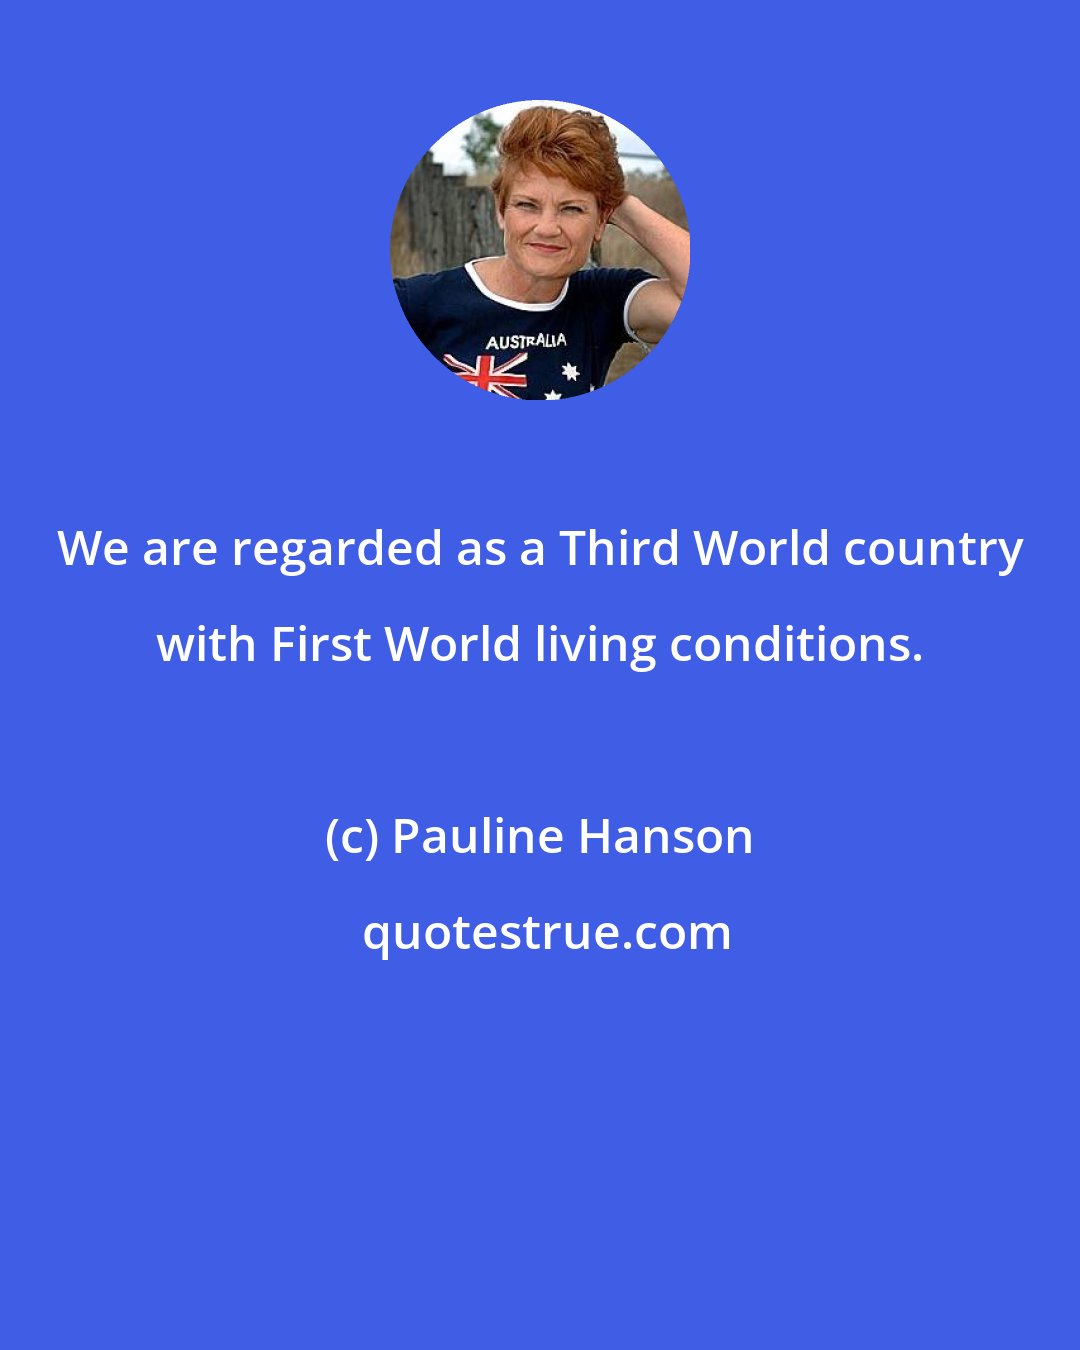 Pauline Hanson: We are regarded as a Third World country with First World living conditions.